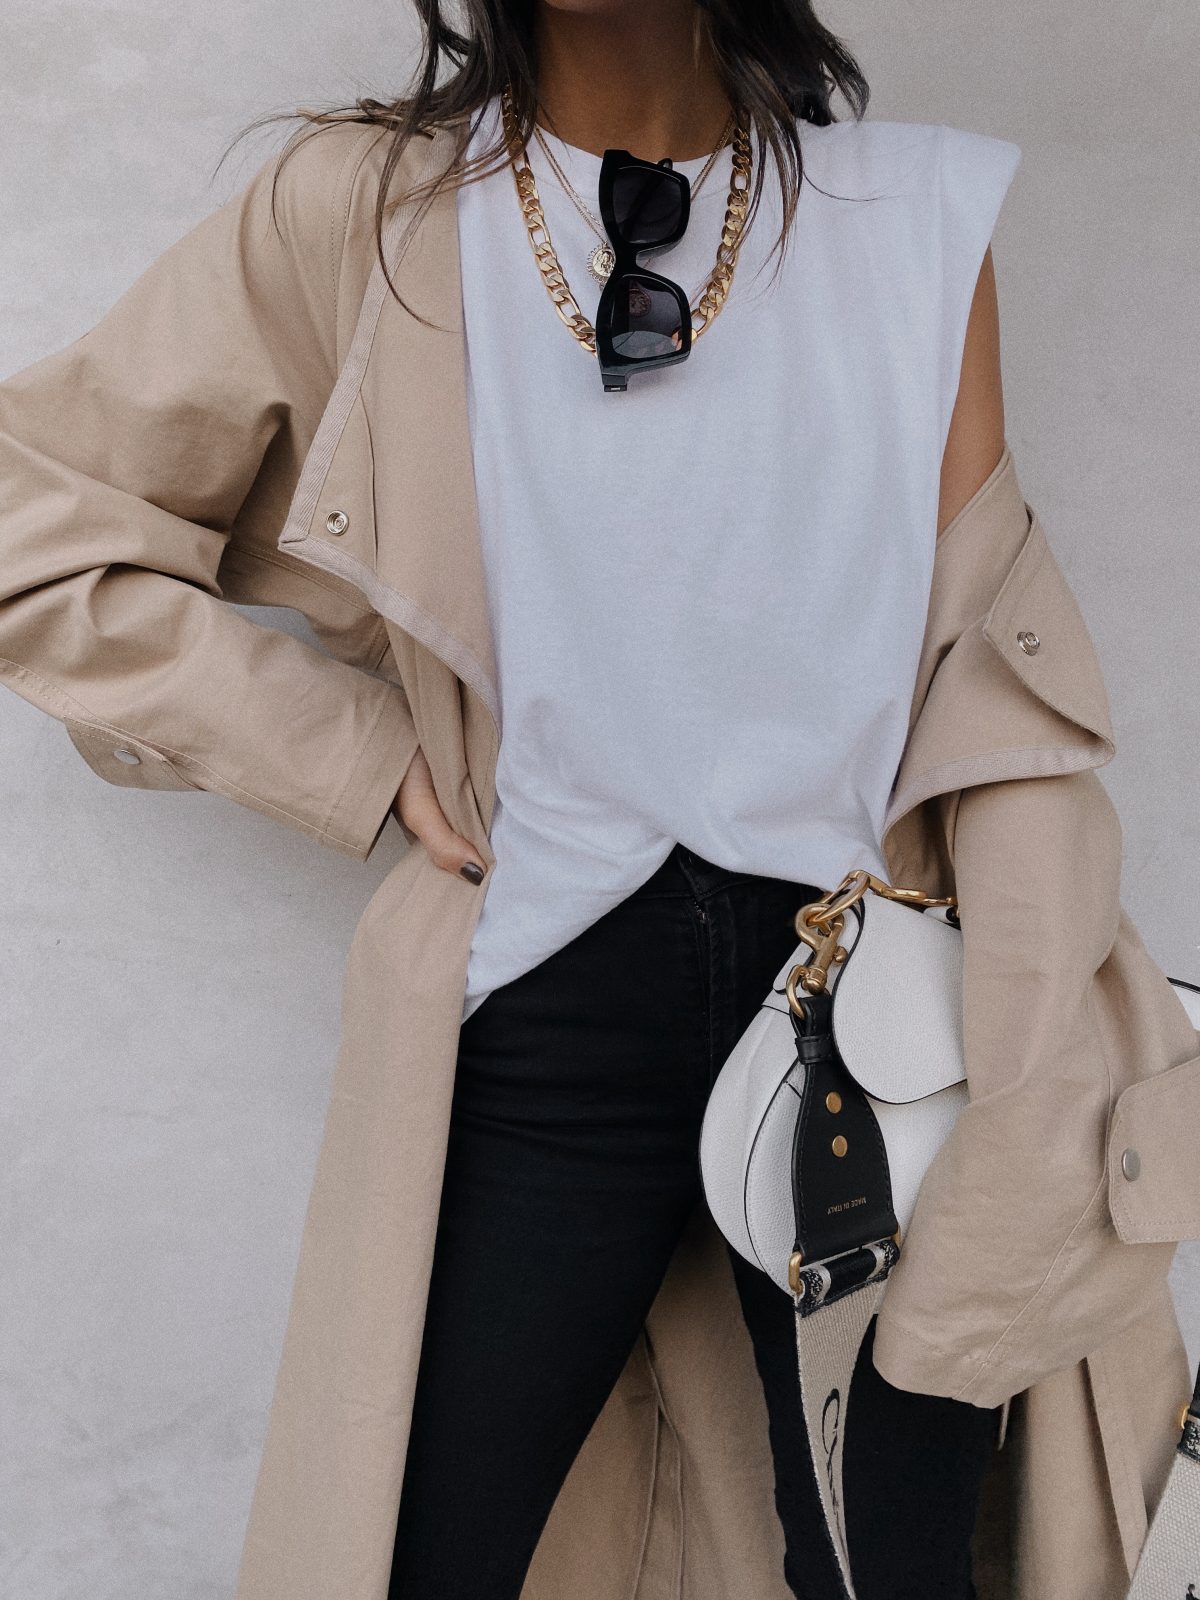 chic outfit trench coat the frankie shop trench dior saddle bag outfit style style inspiration outfit of the day streetstyle blogger kayla seah not your standard blogger fashion los angeles new york